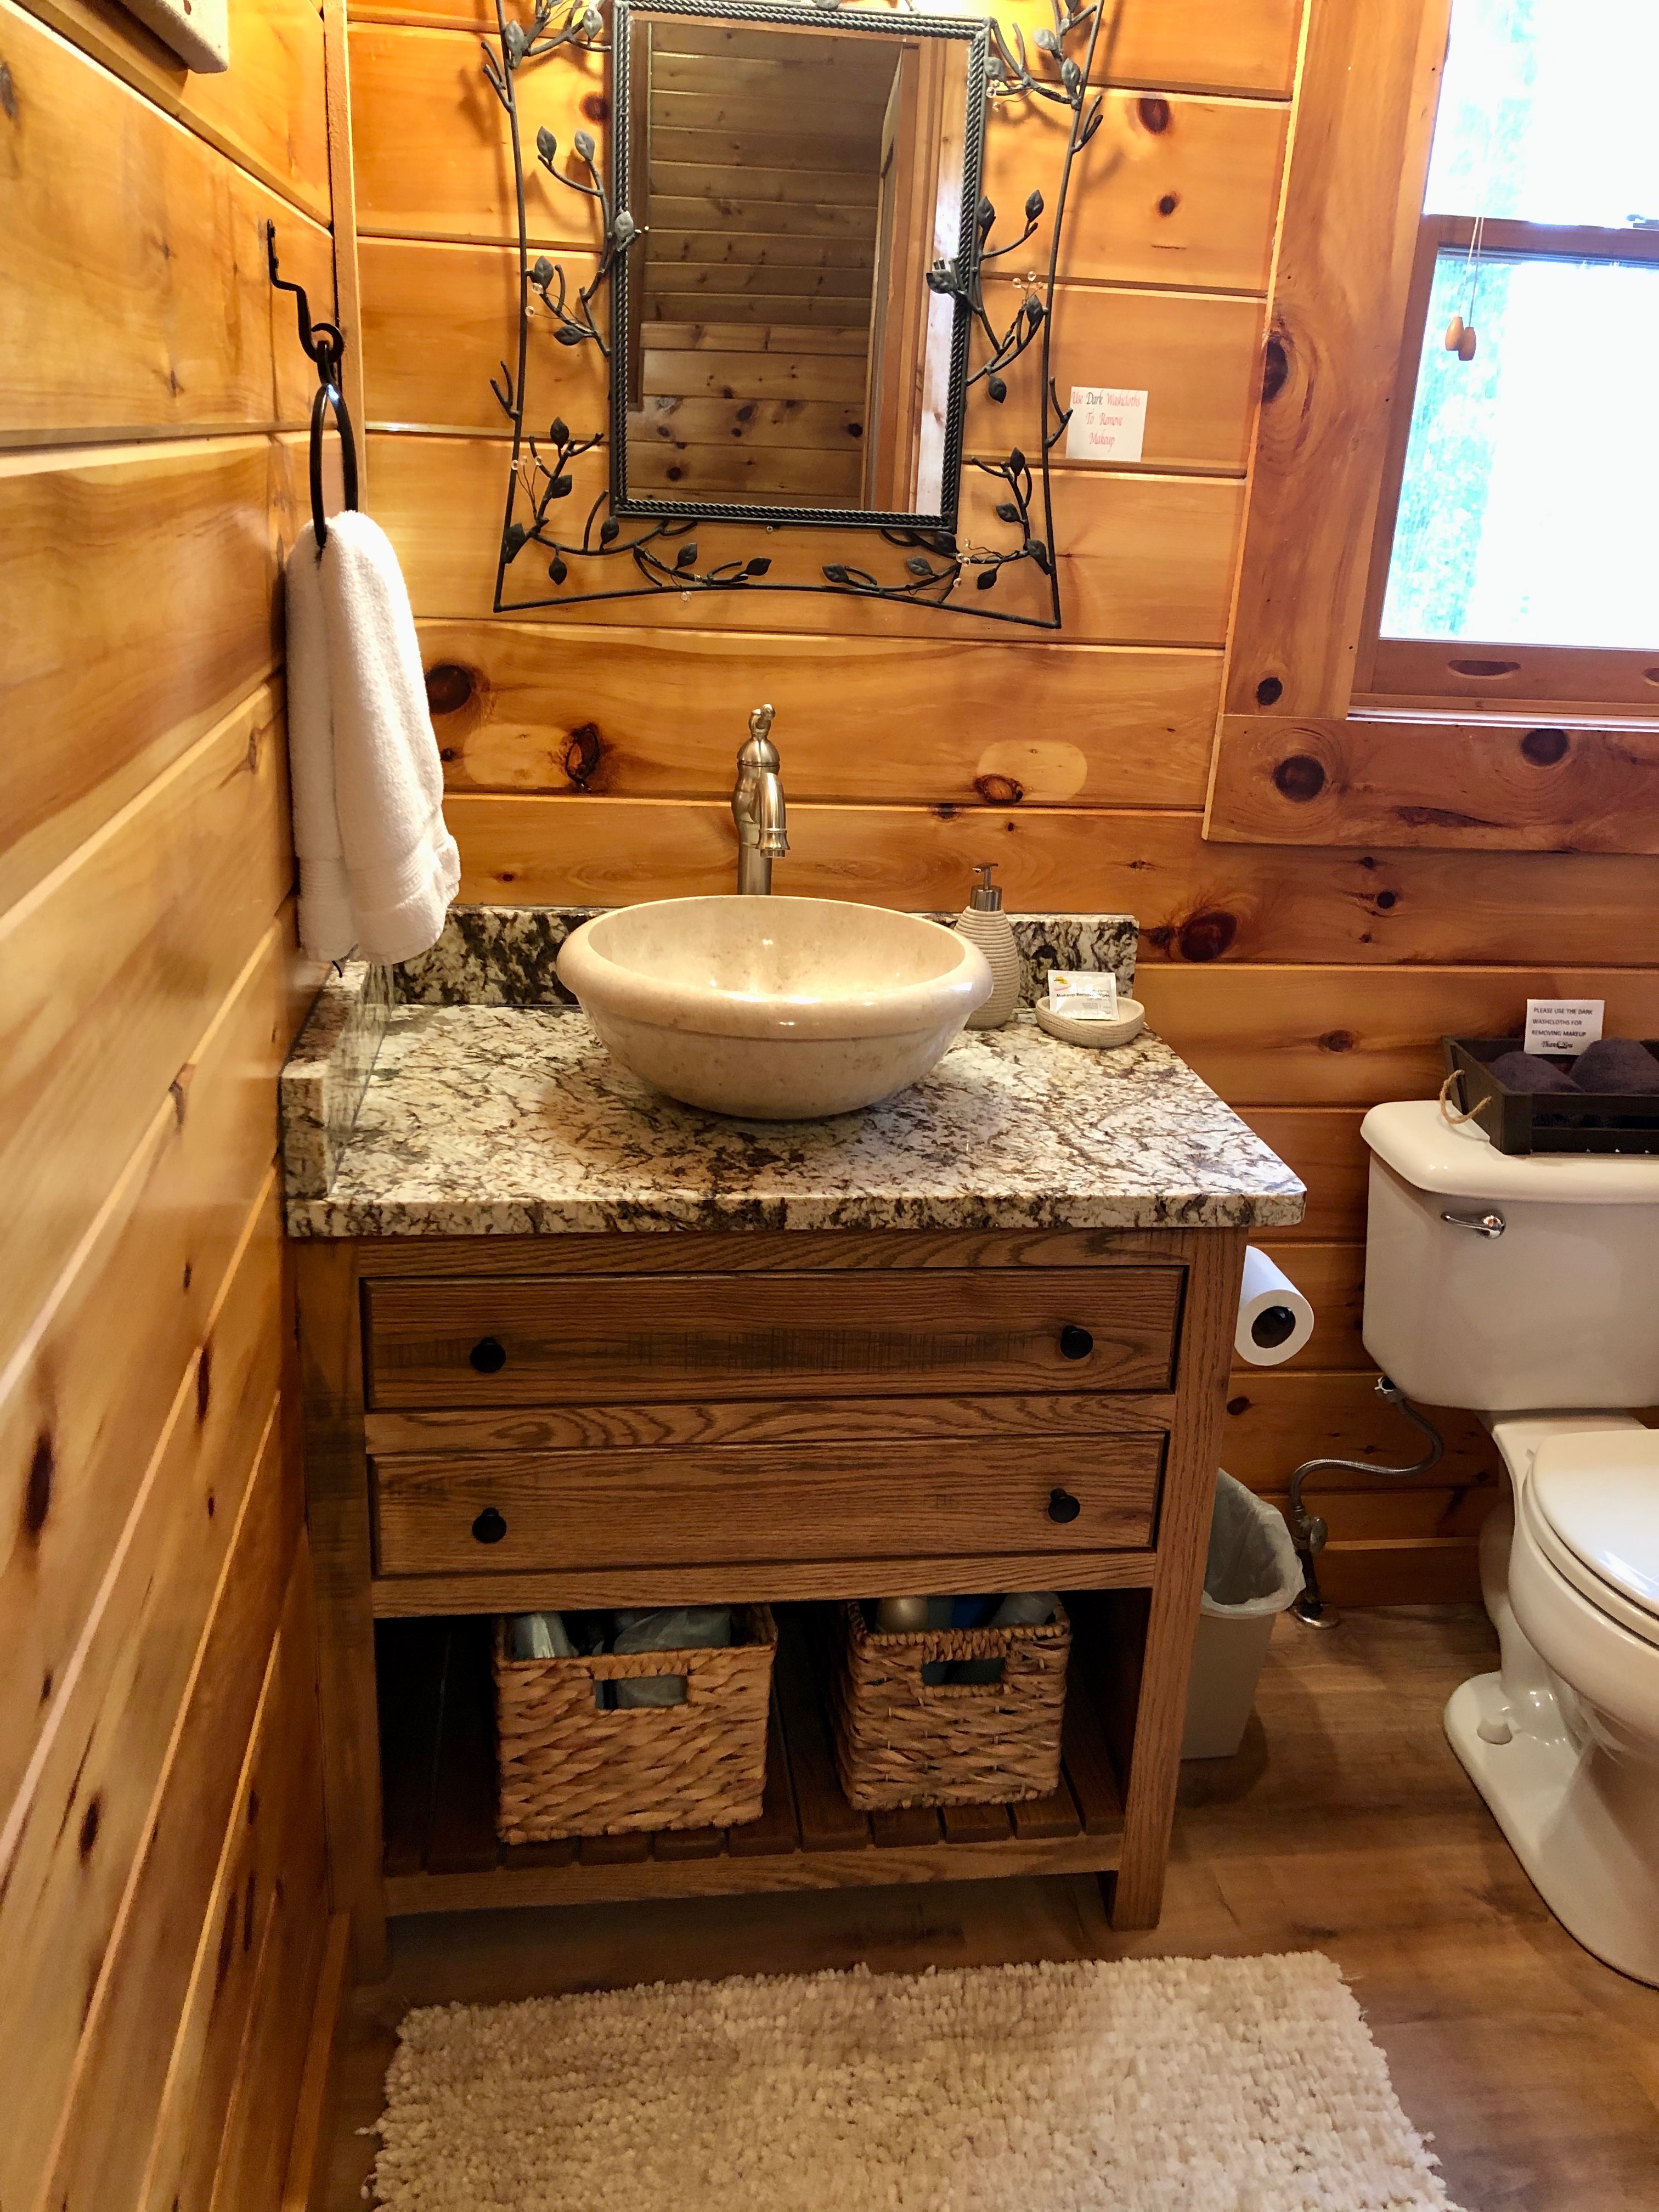 Newly remodeled upstairs bathroom with rustic vanity and granite 2/21